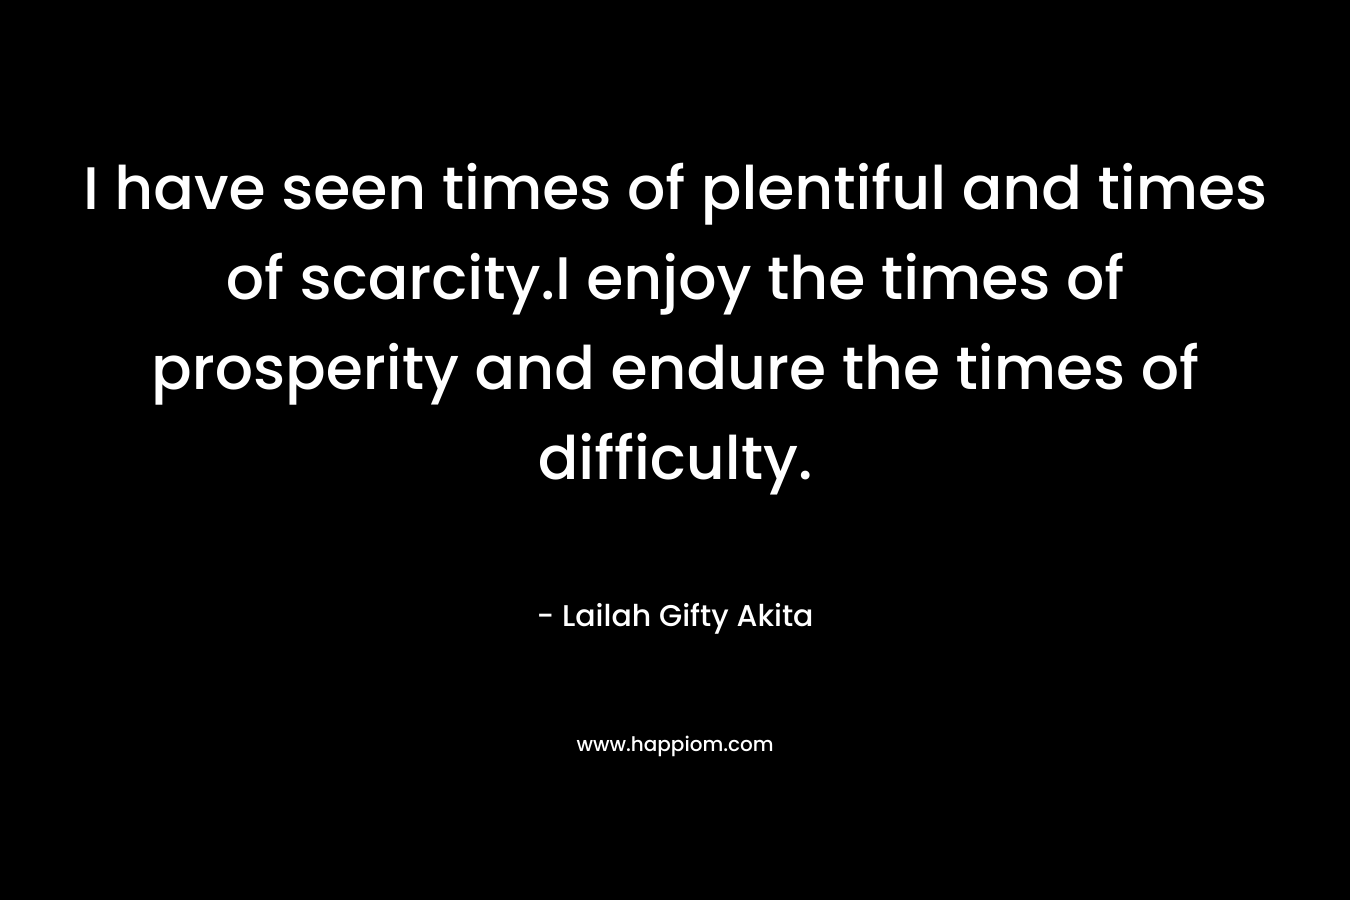 I have seen times of plentiful and times of scarcity.I enjoy the times of prosperity and endure the times of difficulty.